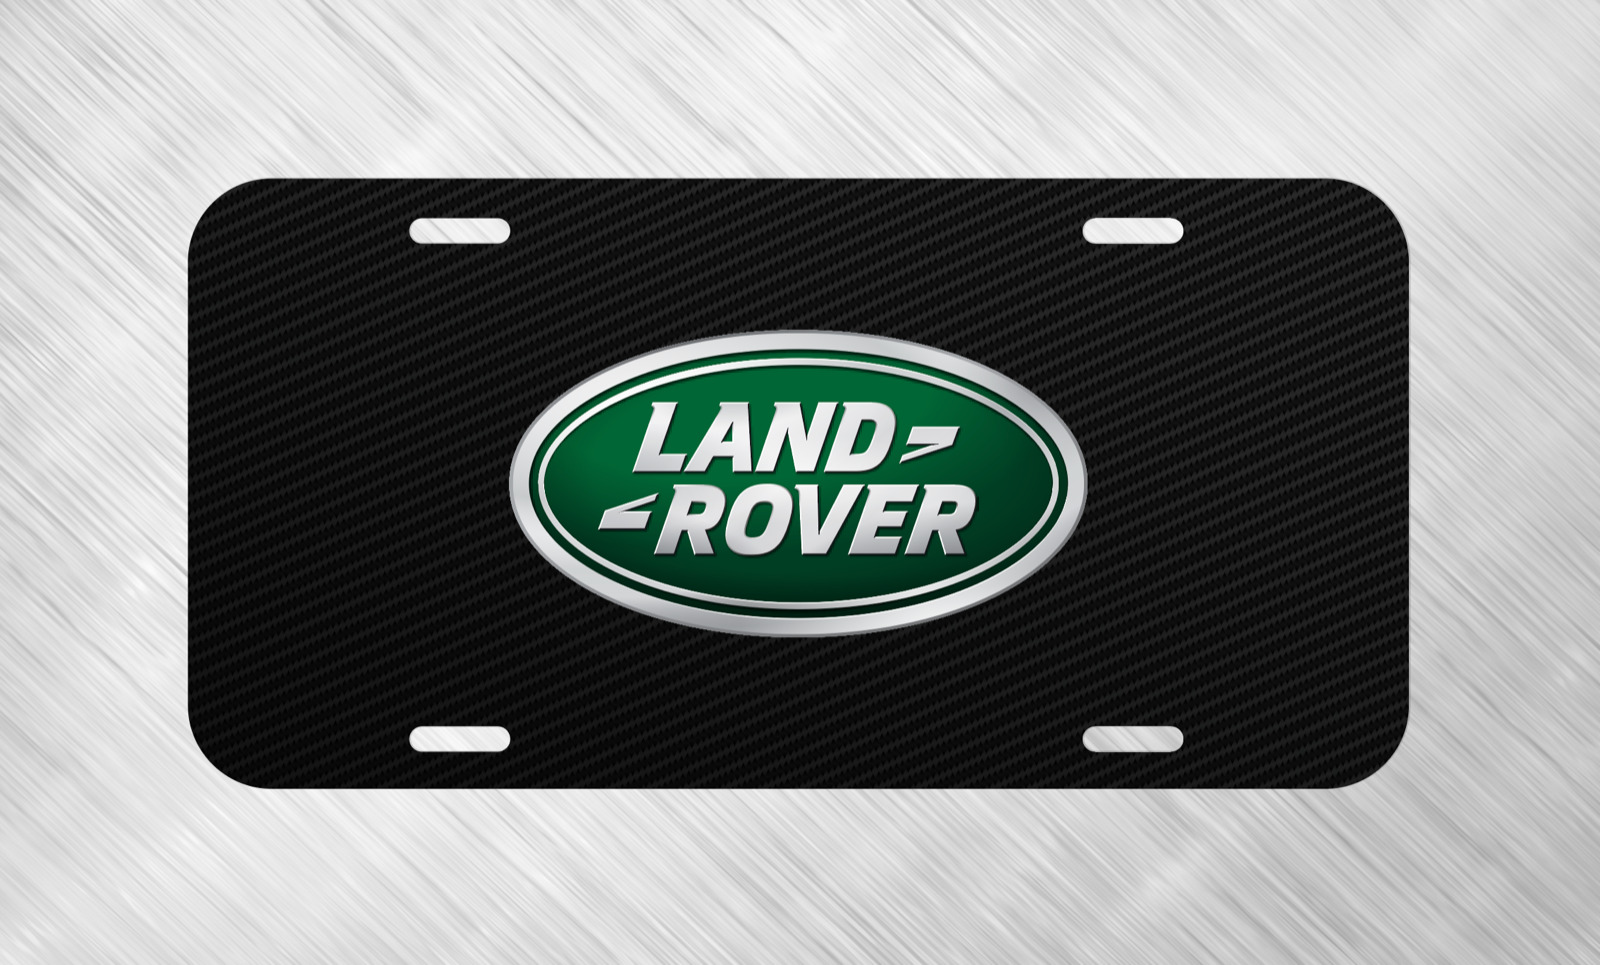 Simulated Carbon For Land rover License Plate Auto Car Tag  